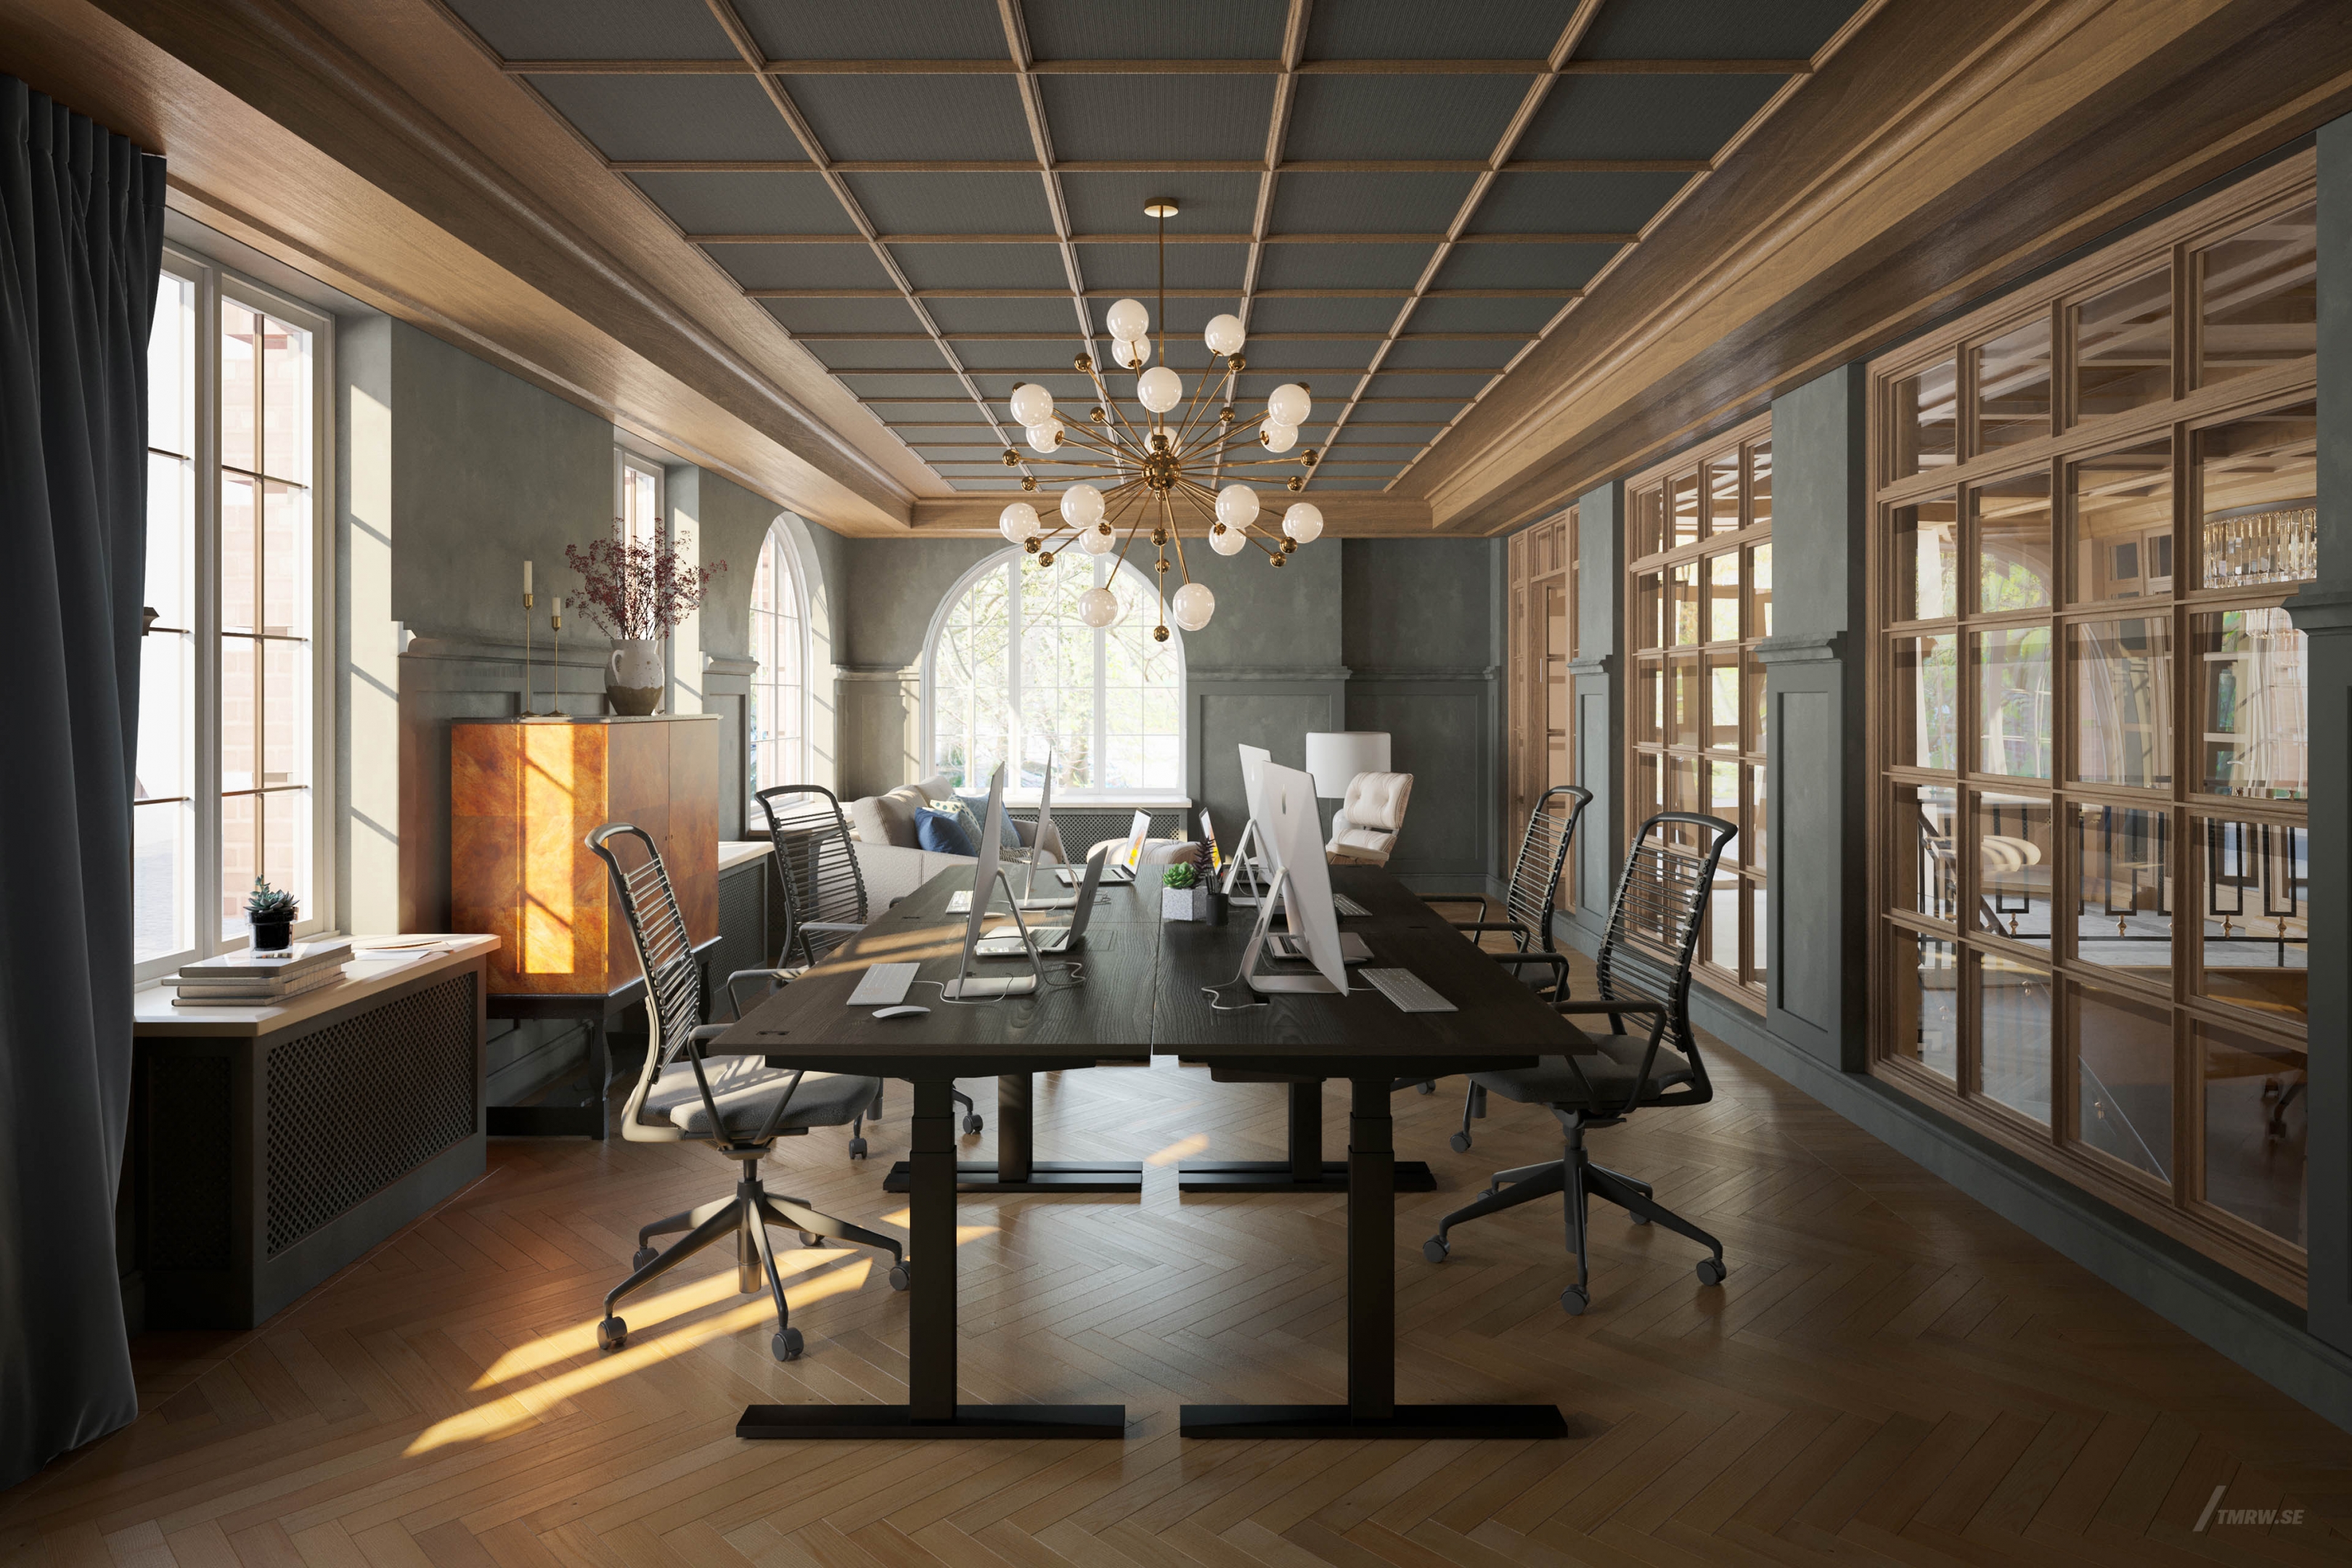 Architectural visualization of Ekmansgatan for TB Gruppen a office area in day light form an interior view.